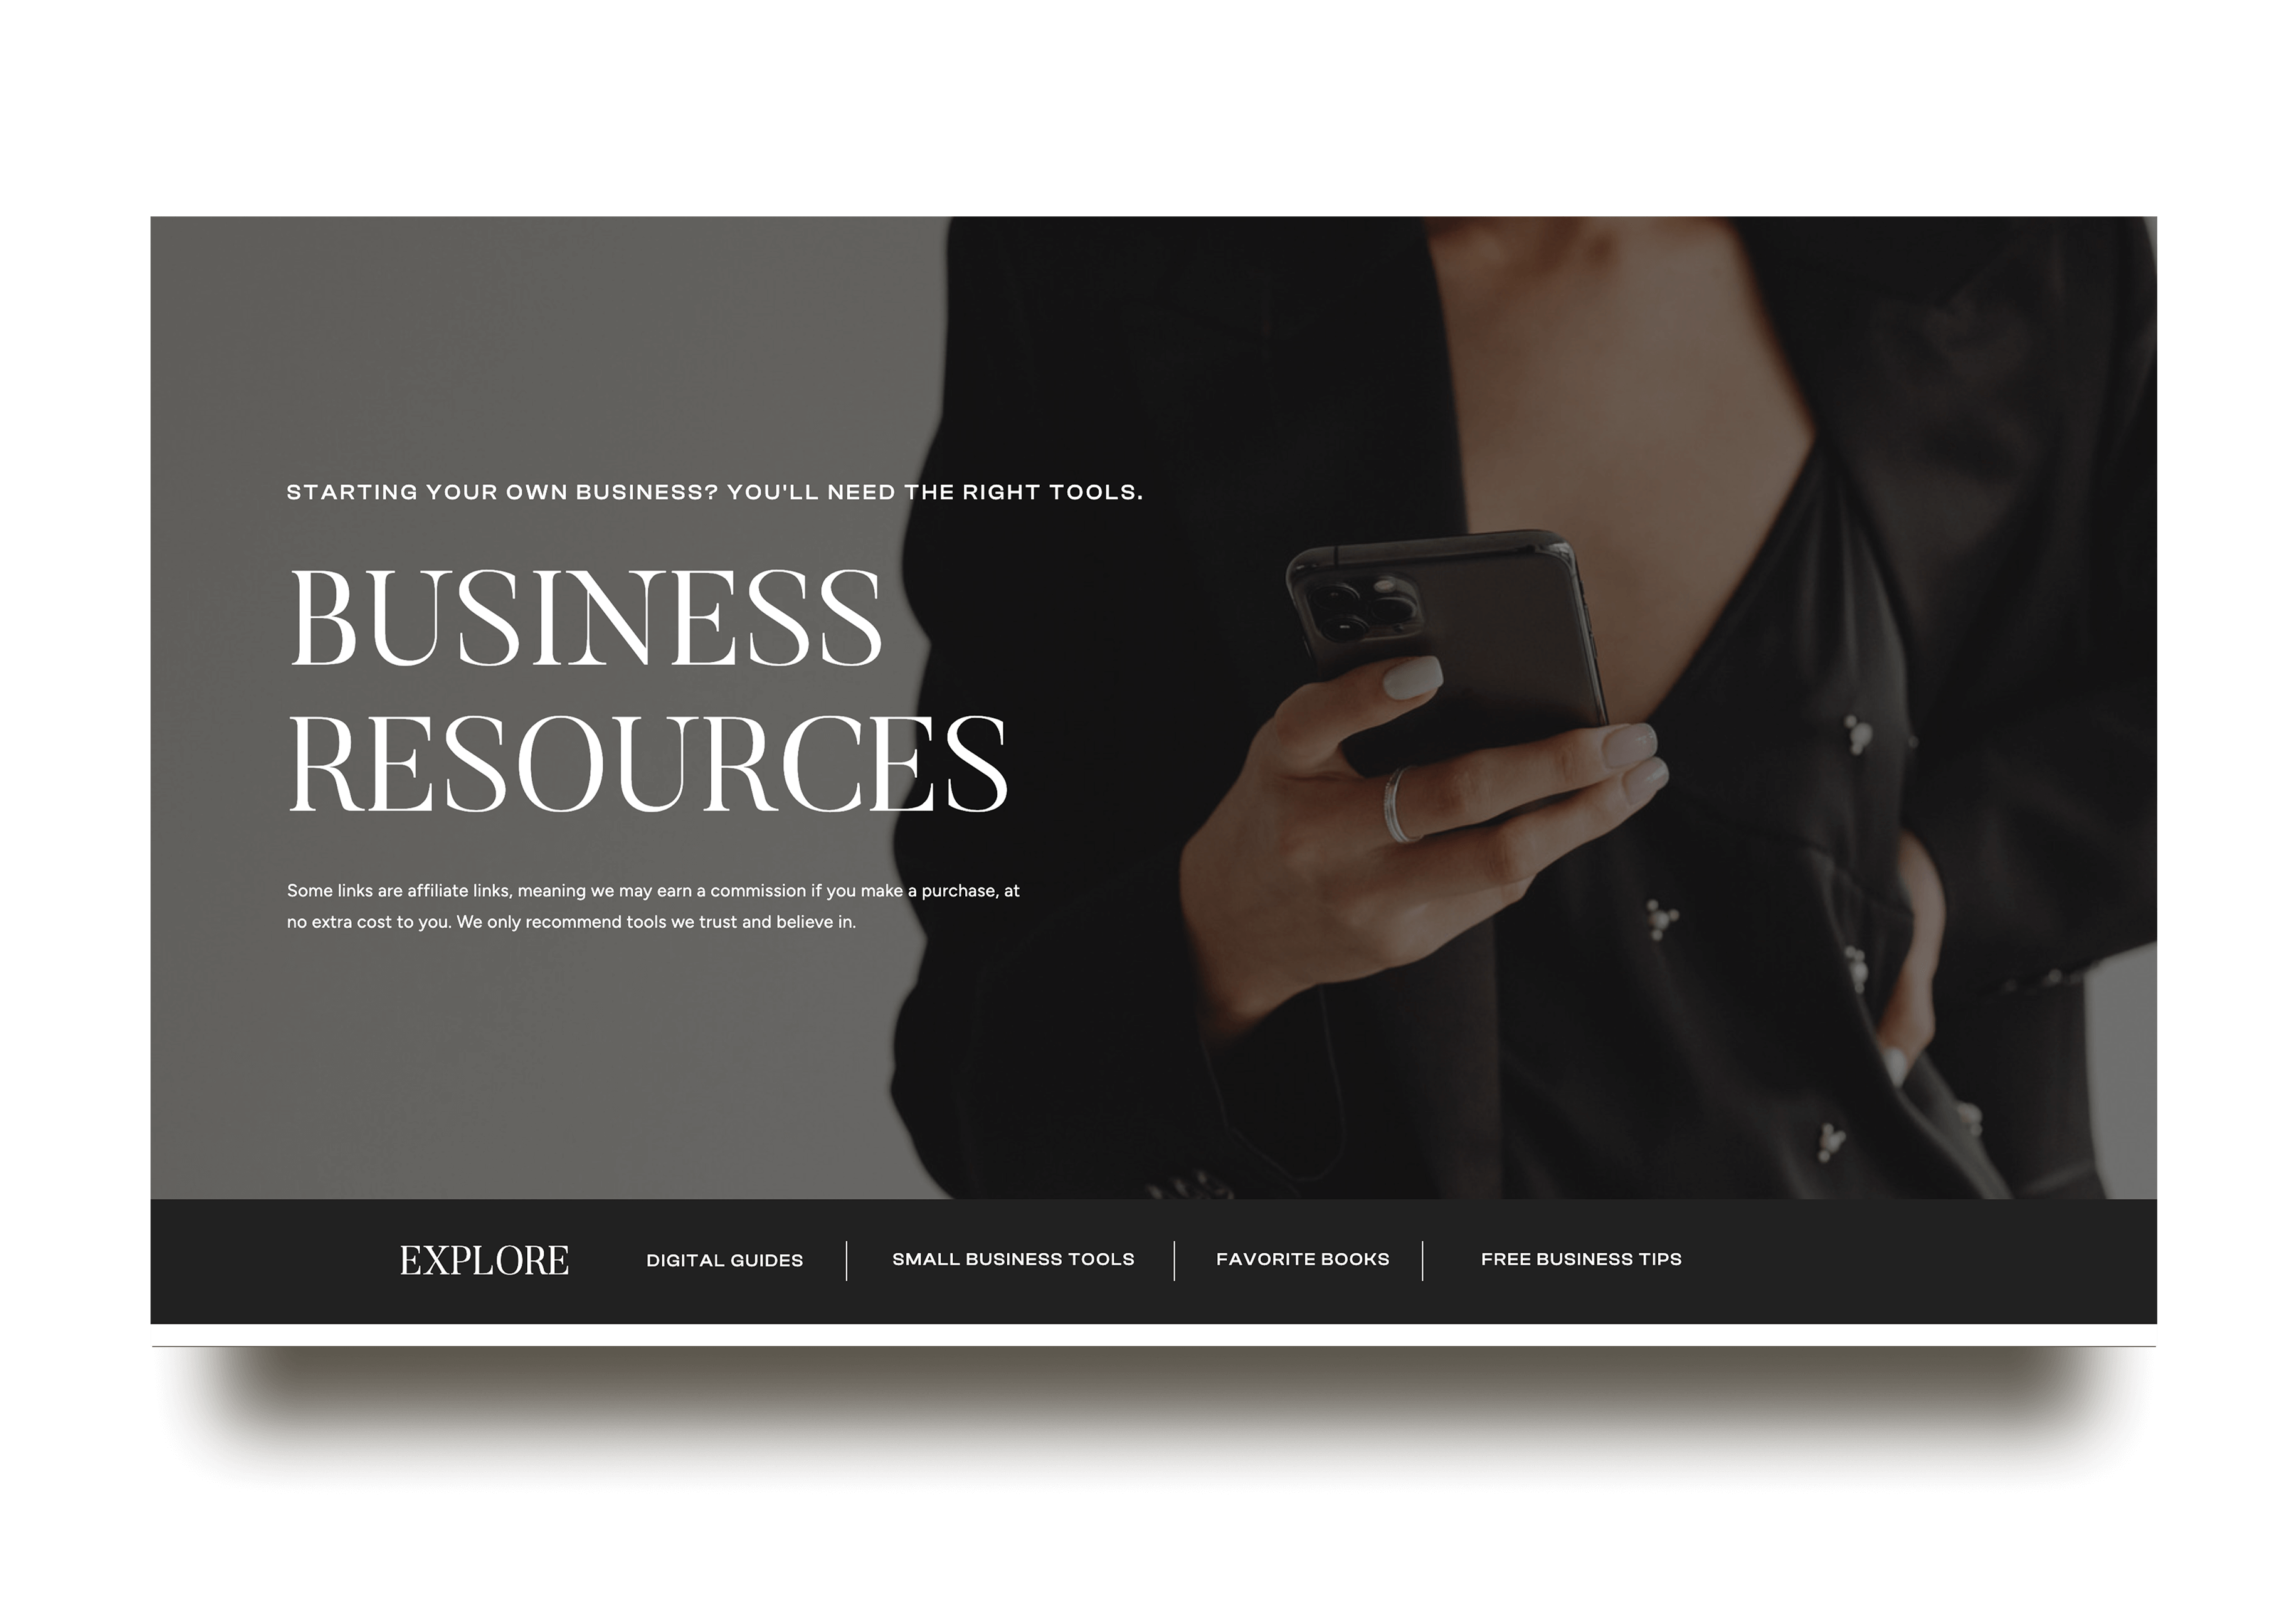 Showit template resources page for business owners